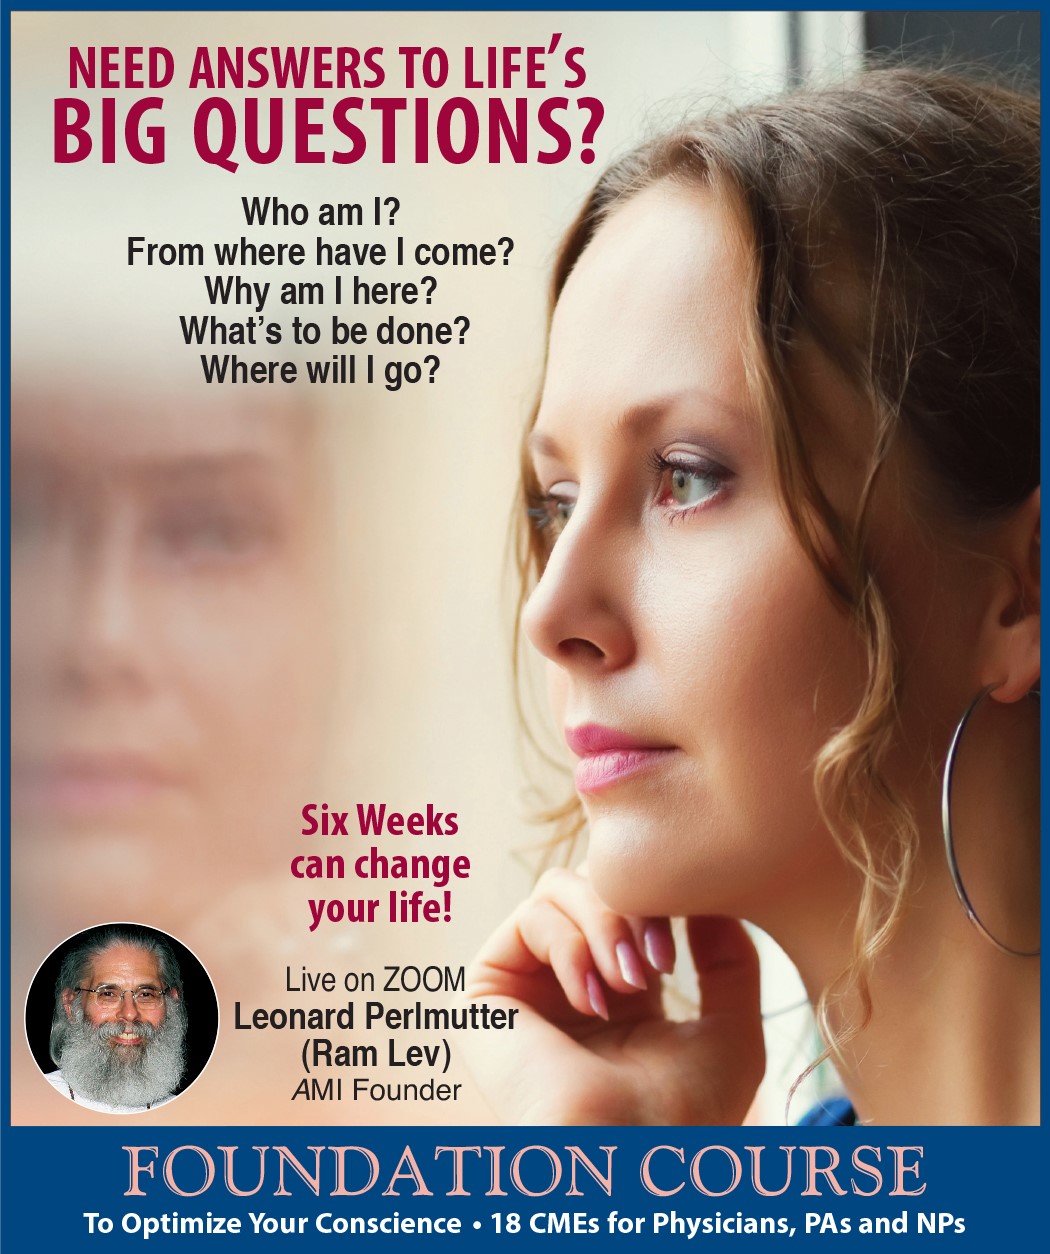 Need answers to life's big questions? Foundation Course to Optimize Your Conscience